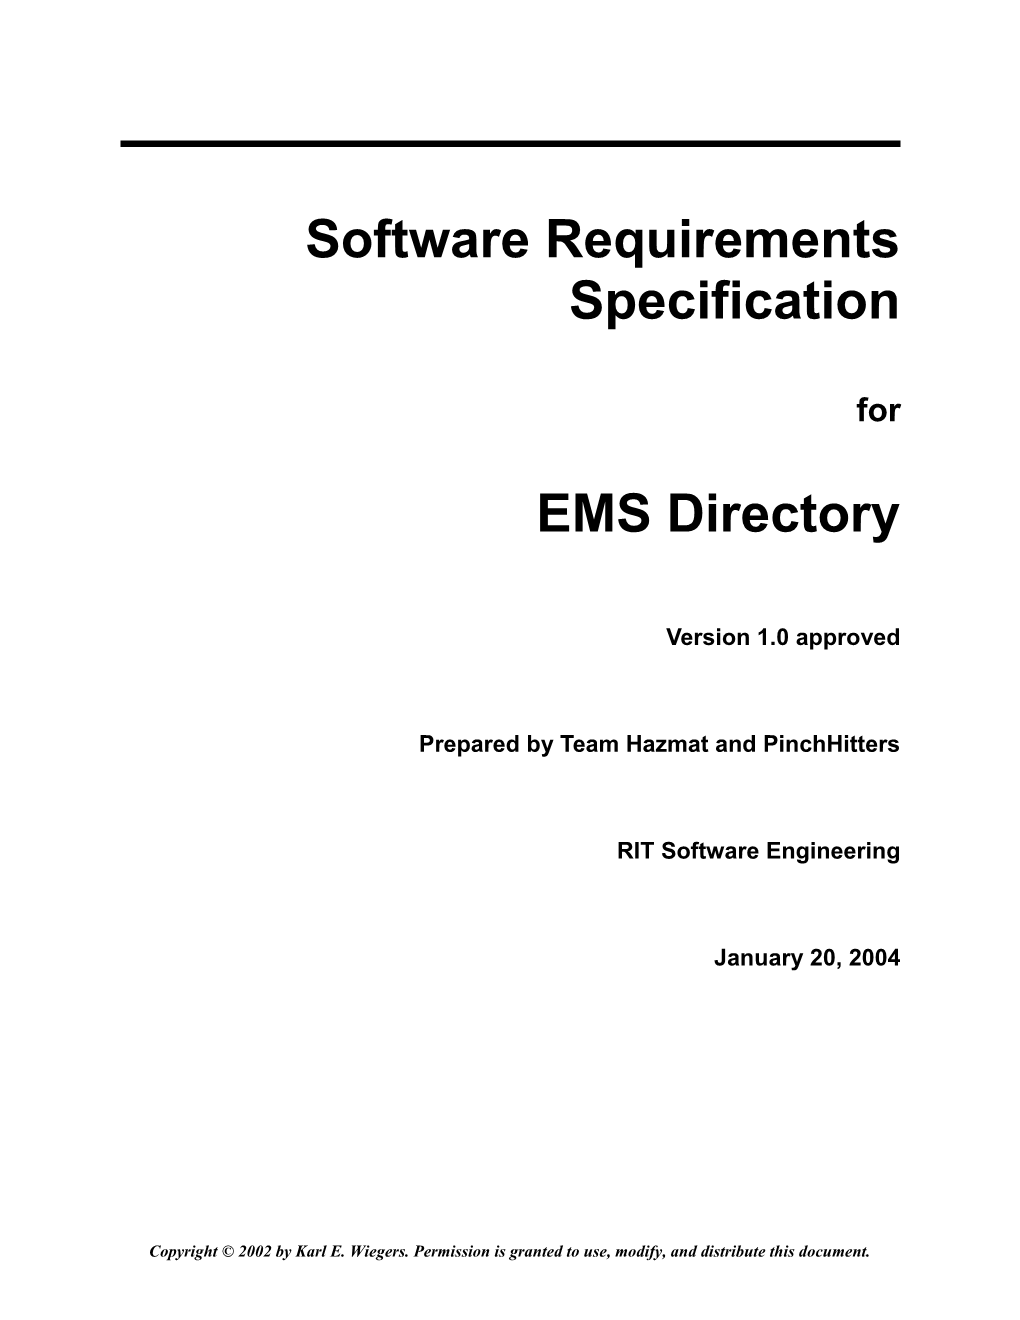 Software Requirements Specification Template s2